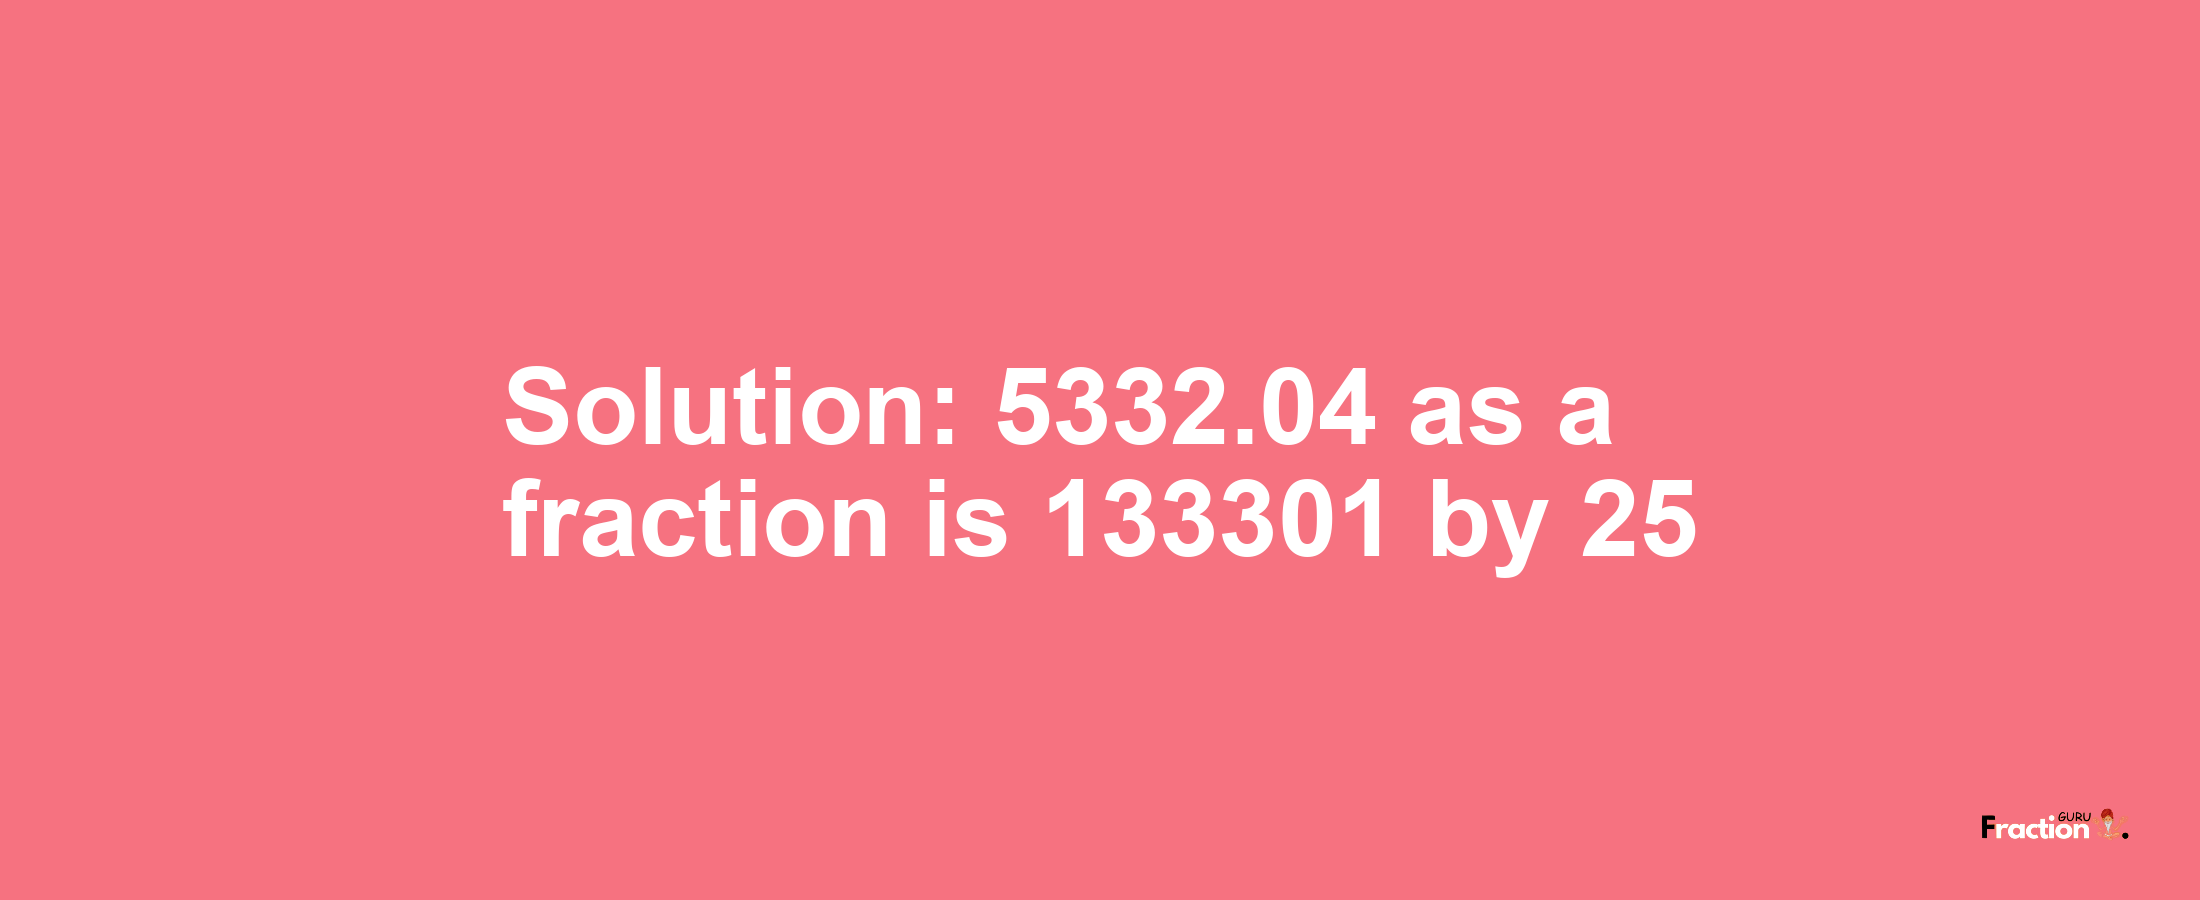 Solution:5332.04 as a fraction is 133301/25